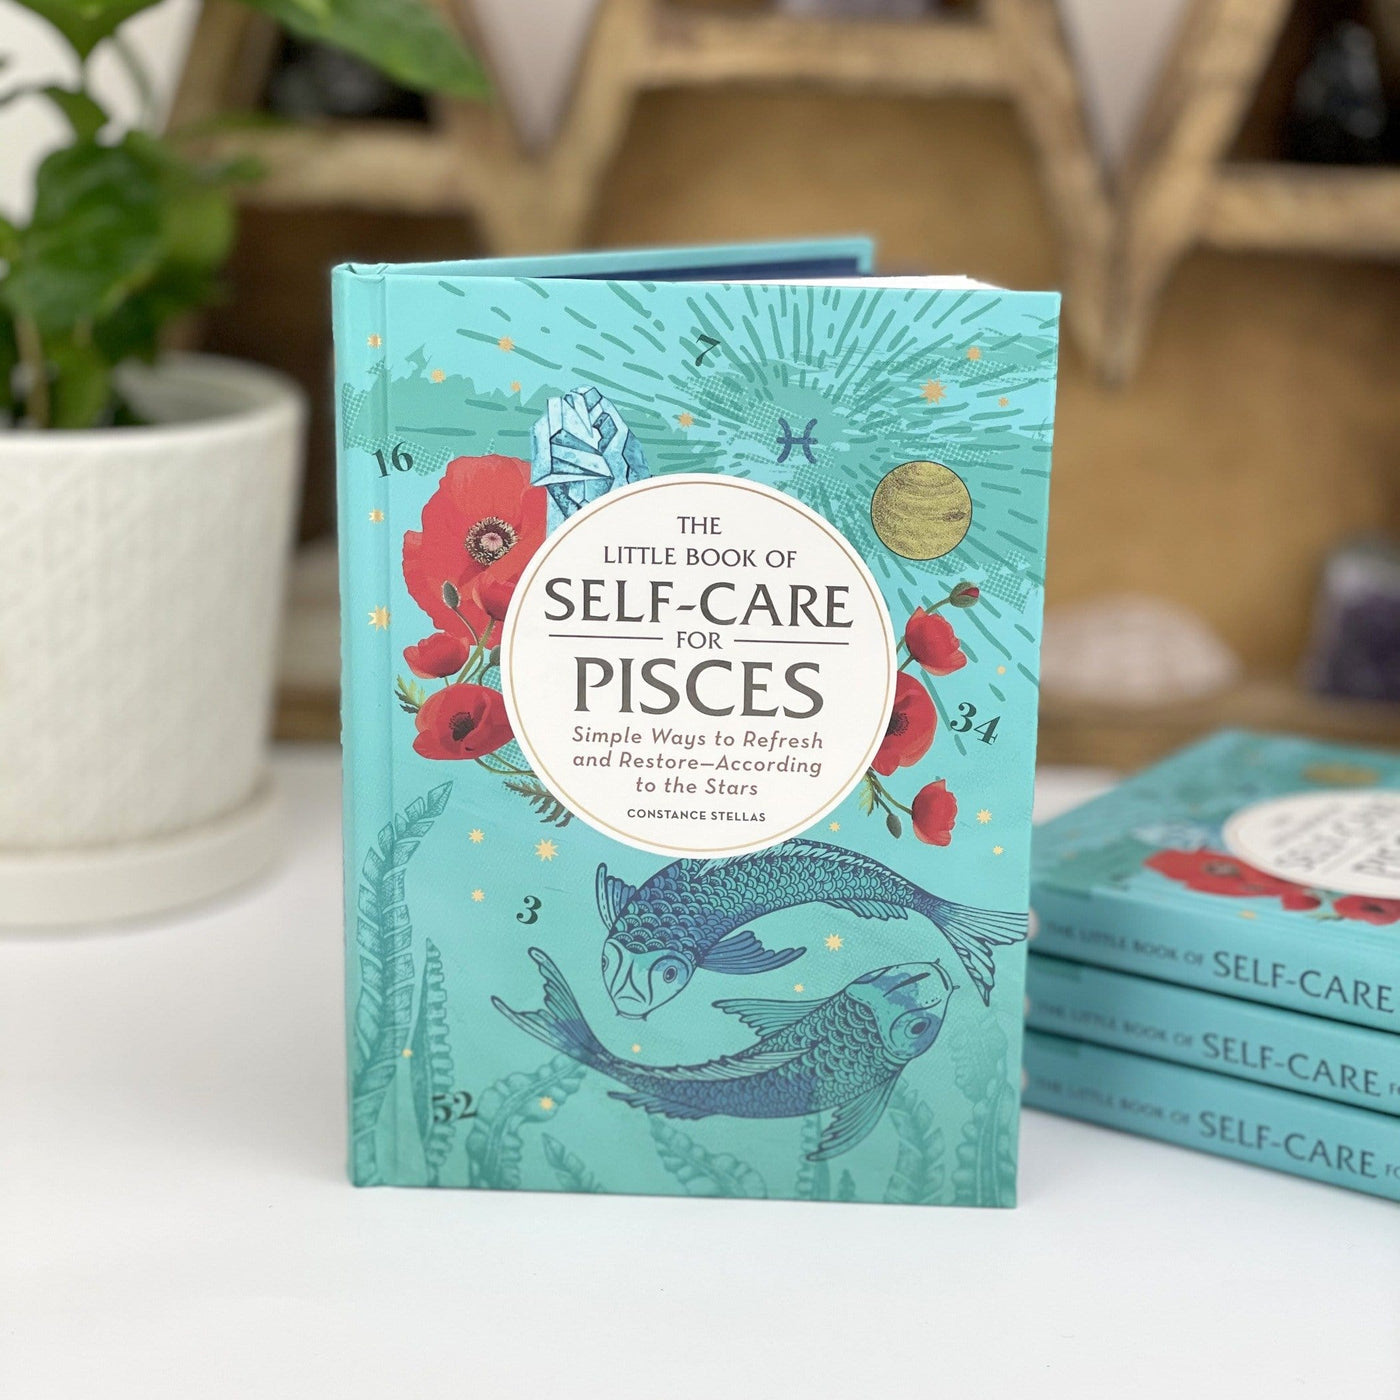 The Little Book of Self-Care for Pisces in a blue color 